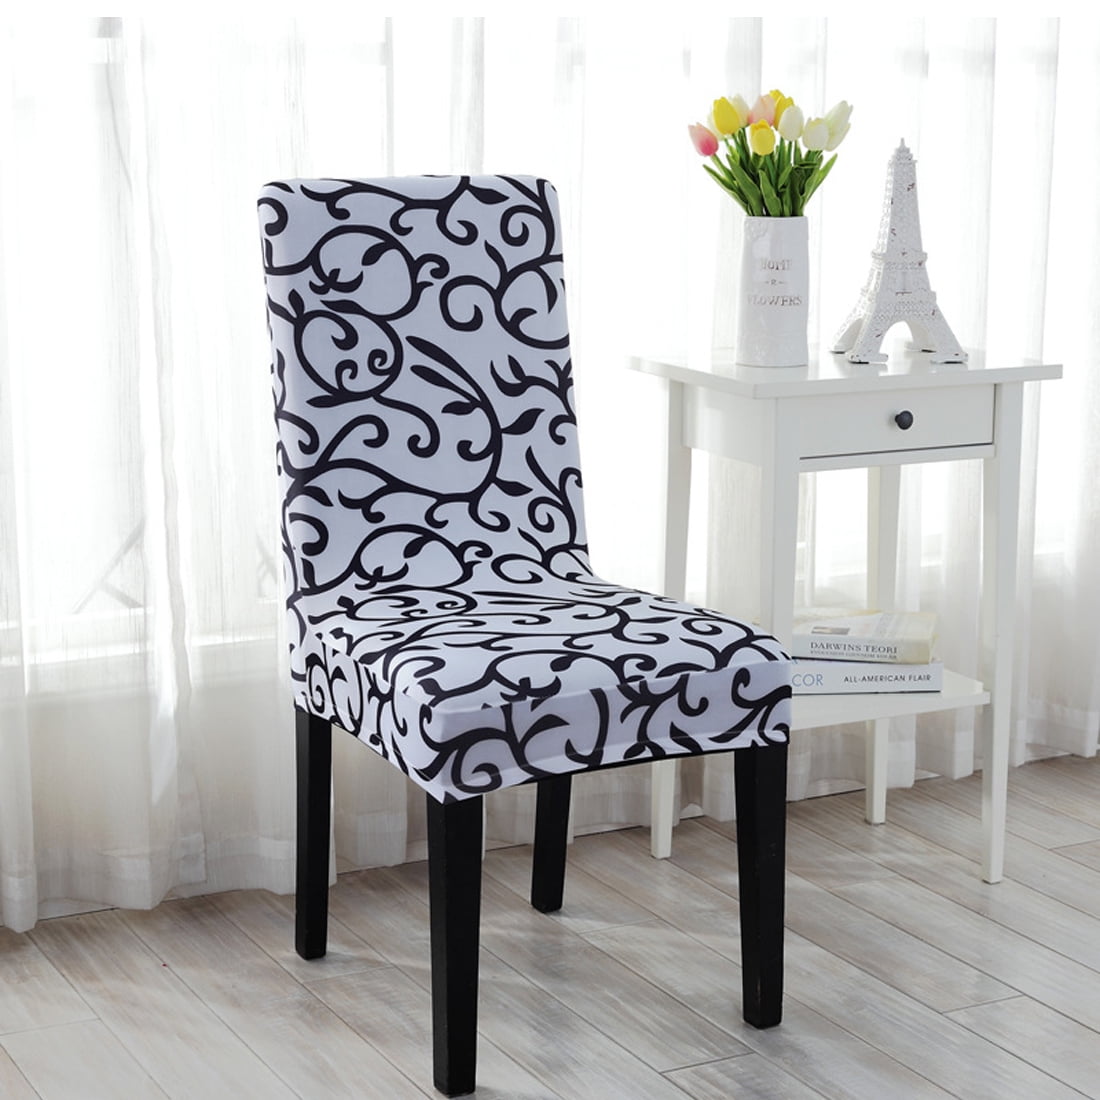 Stretchy Dining Chair Cover Short Chair Covers Washable Protector Walmart Com Walmart Com